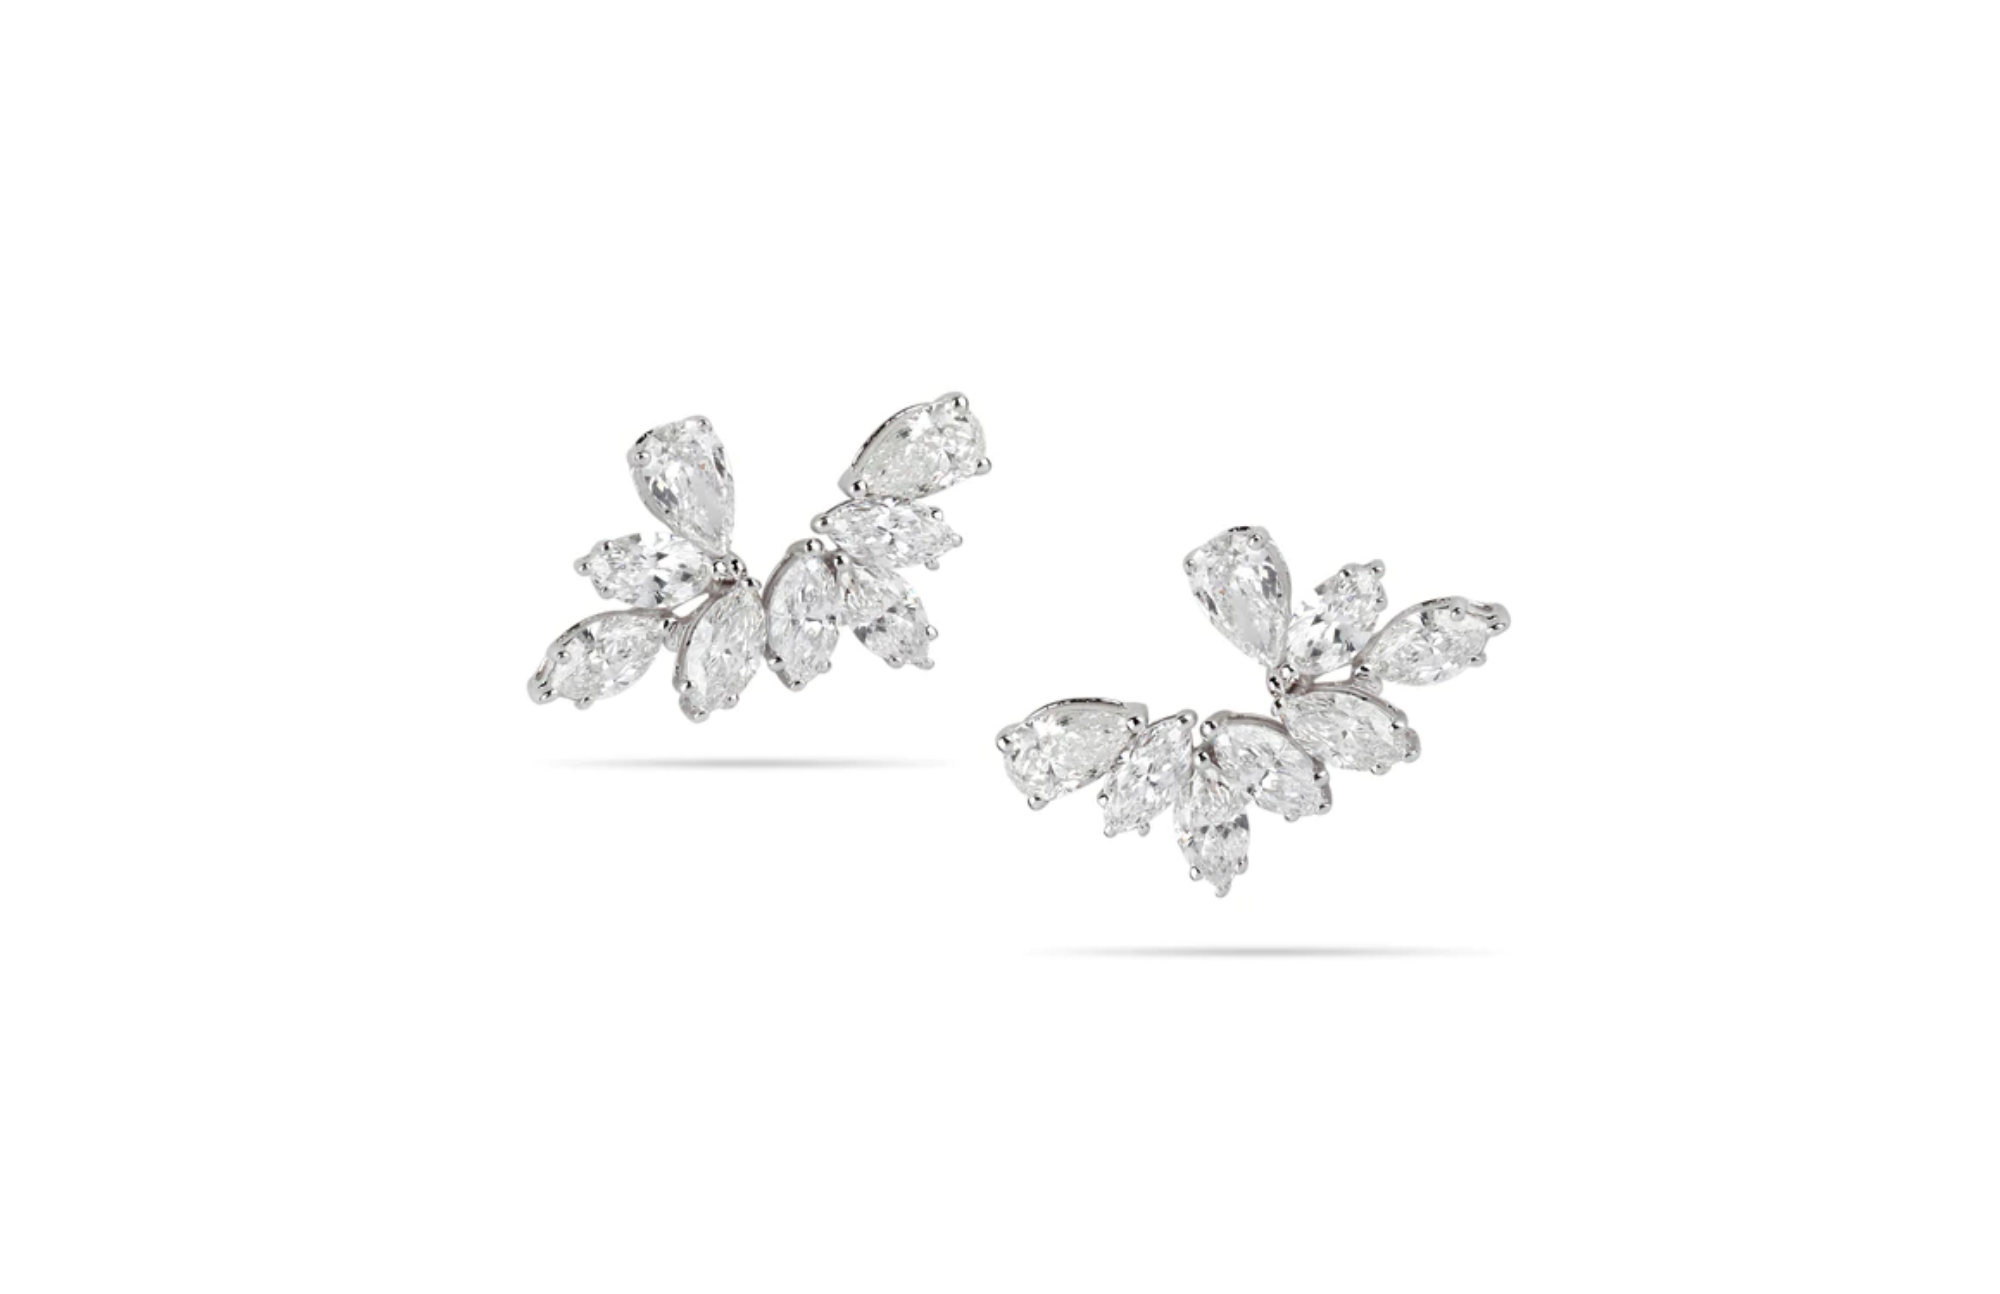 Marquise cut asymmetrical earrings with 18k white gold